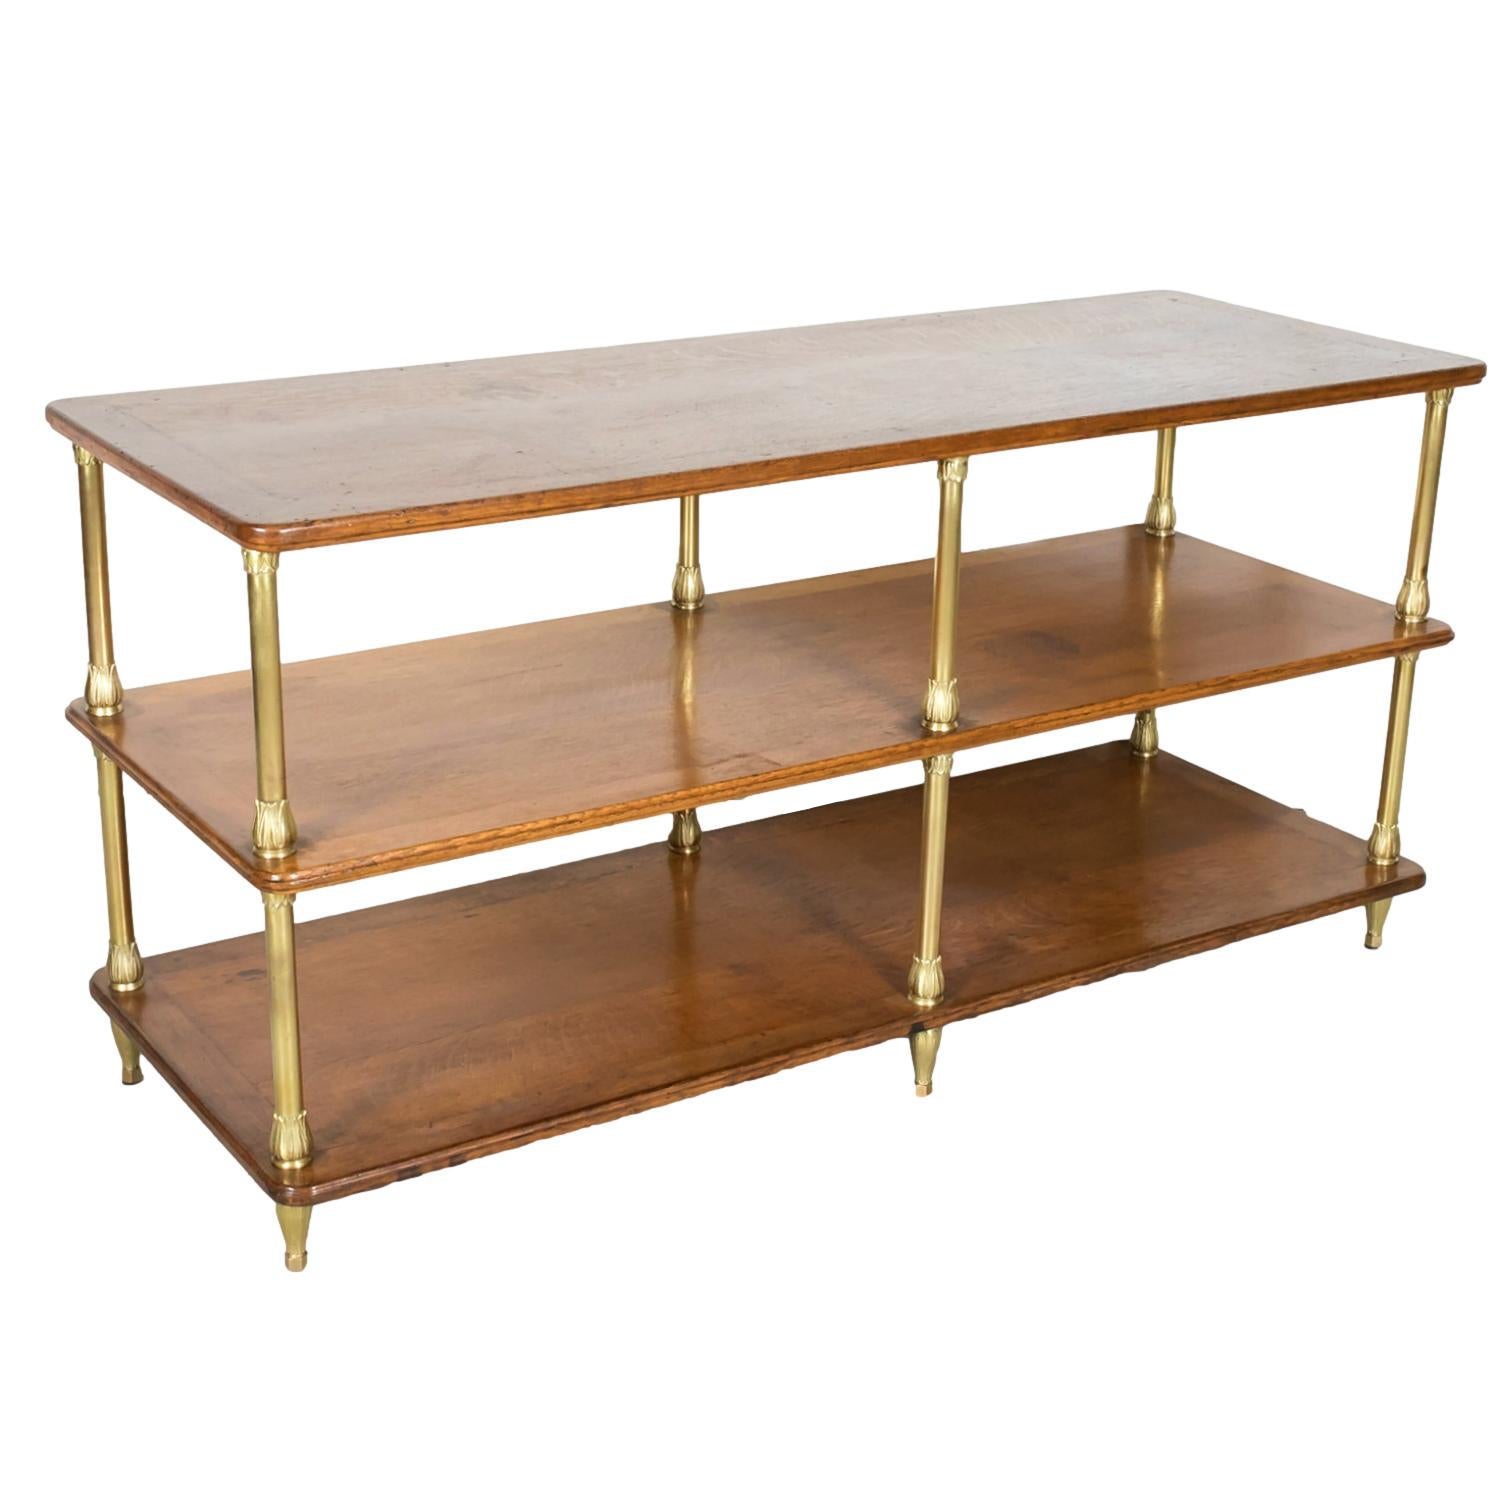 20th Century French Art Deco Period Oak and Brass Display Table / Kitchen Island